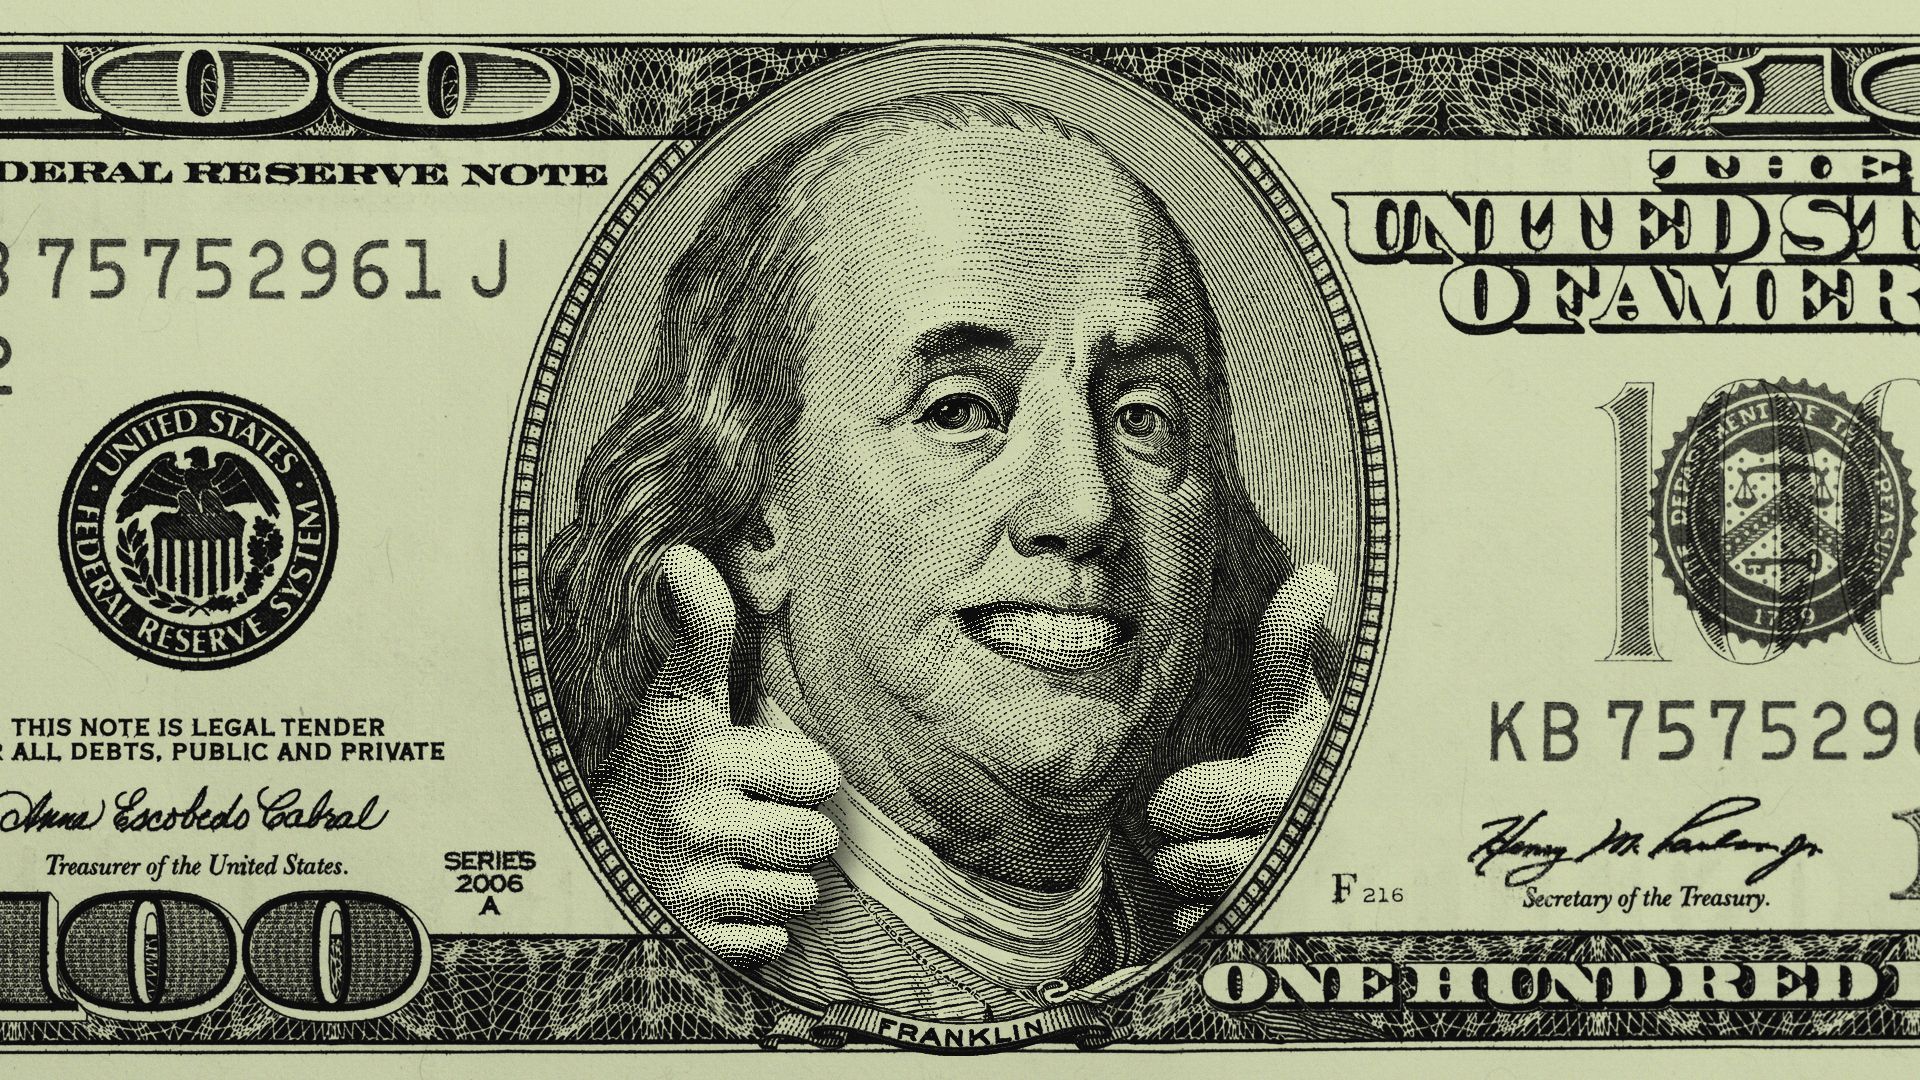 Illustration of Benjamin Franklin with two thumbs up and grimacing smile. 